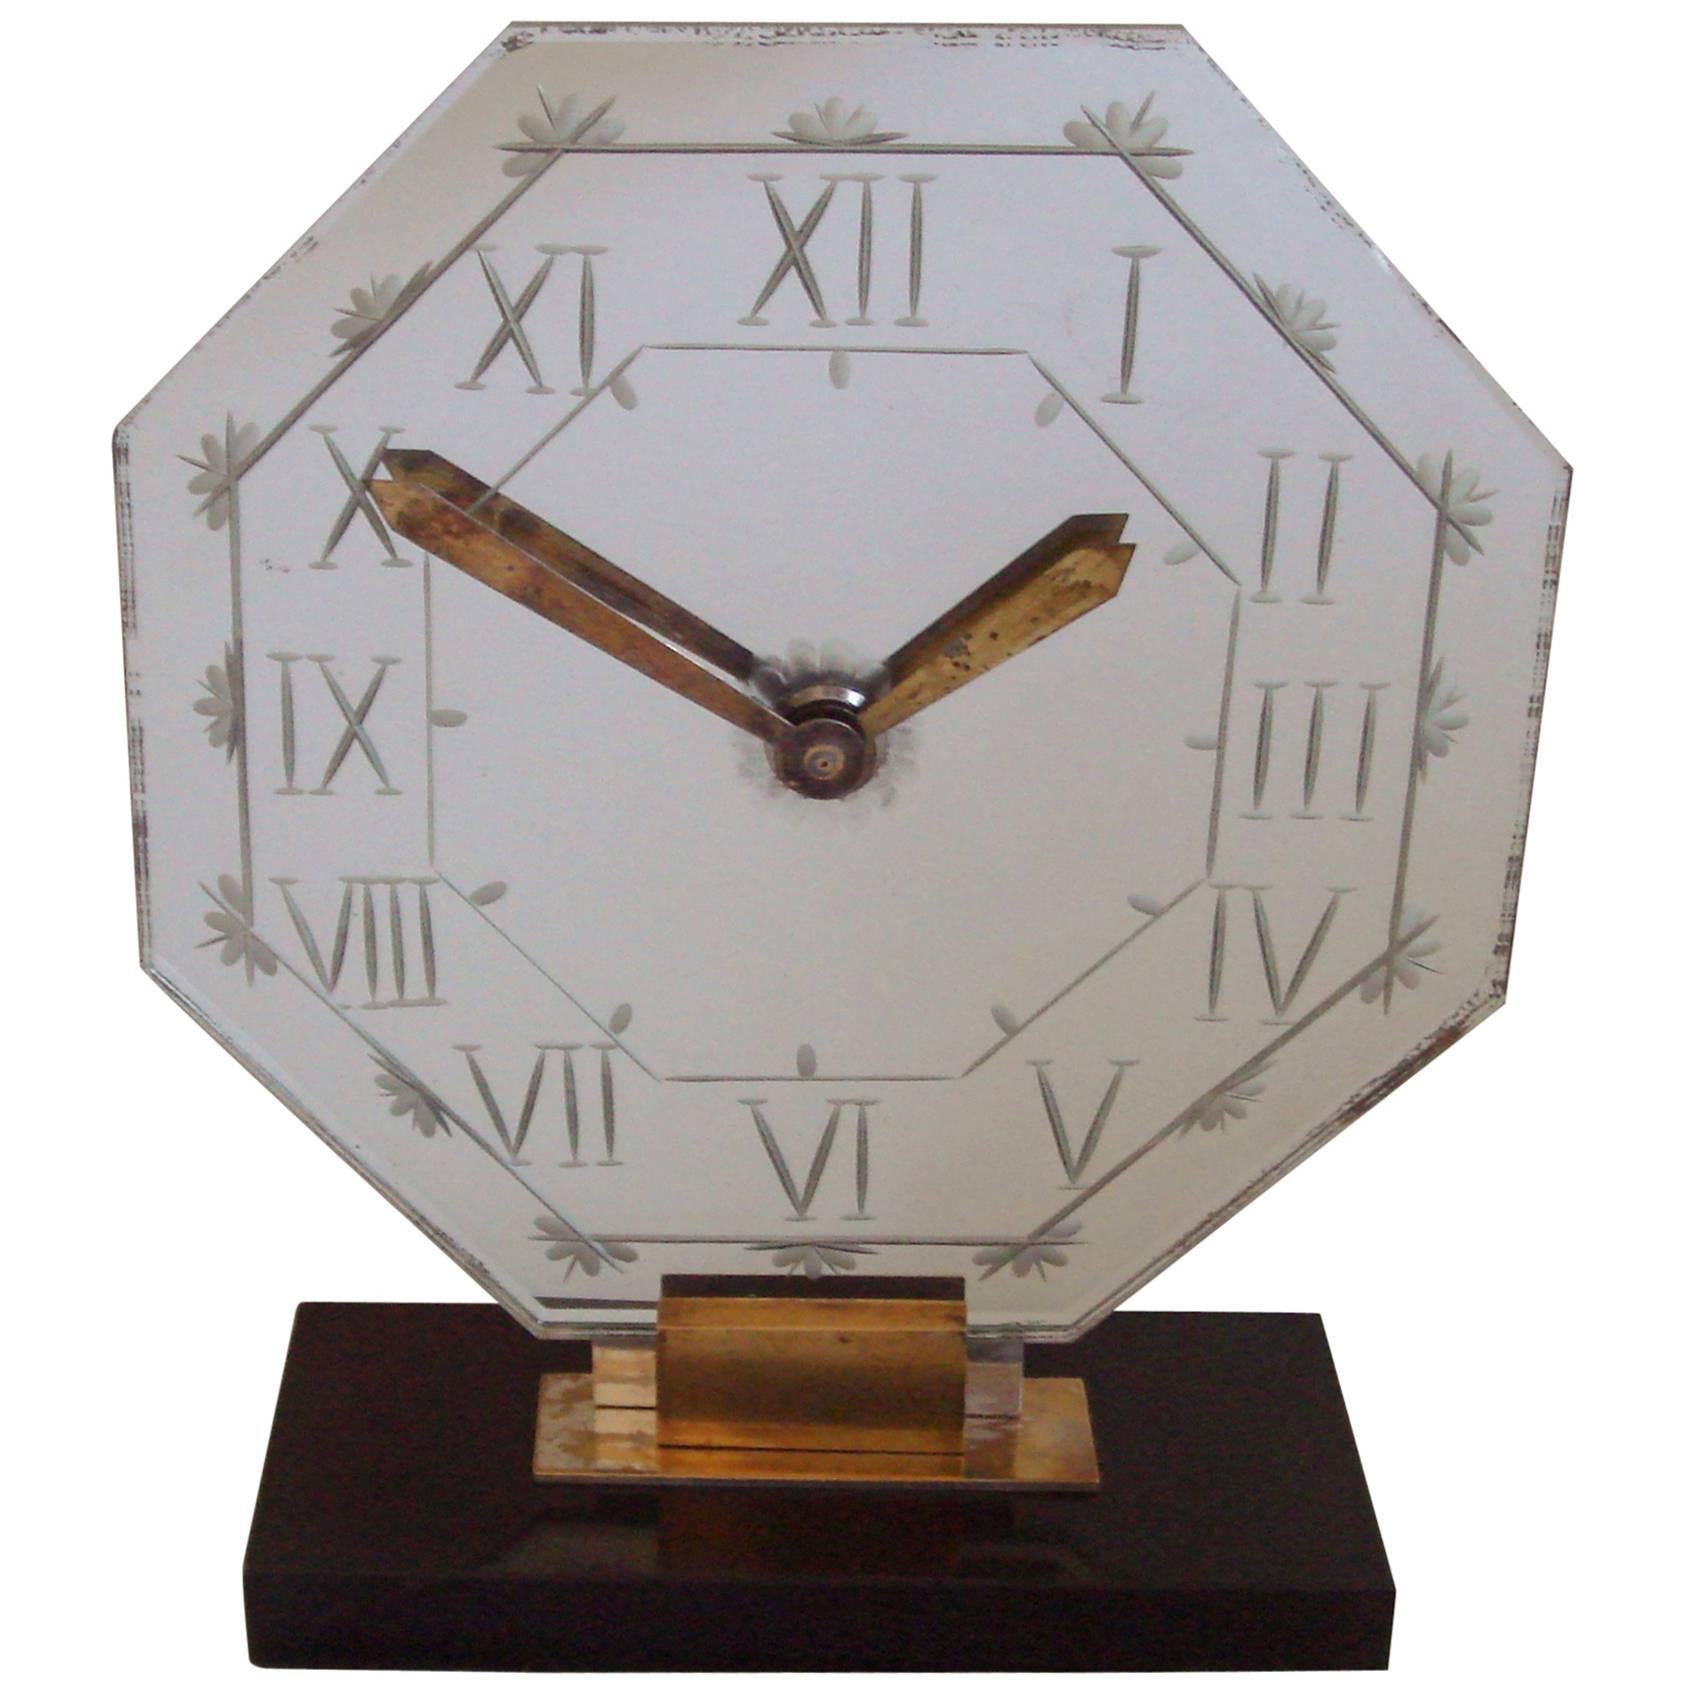 French Art Deco Chrome, Brass, Marble and Wheel-Cut Mirror Mantel Clock by Marti